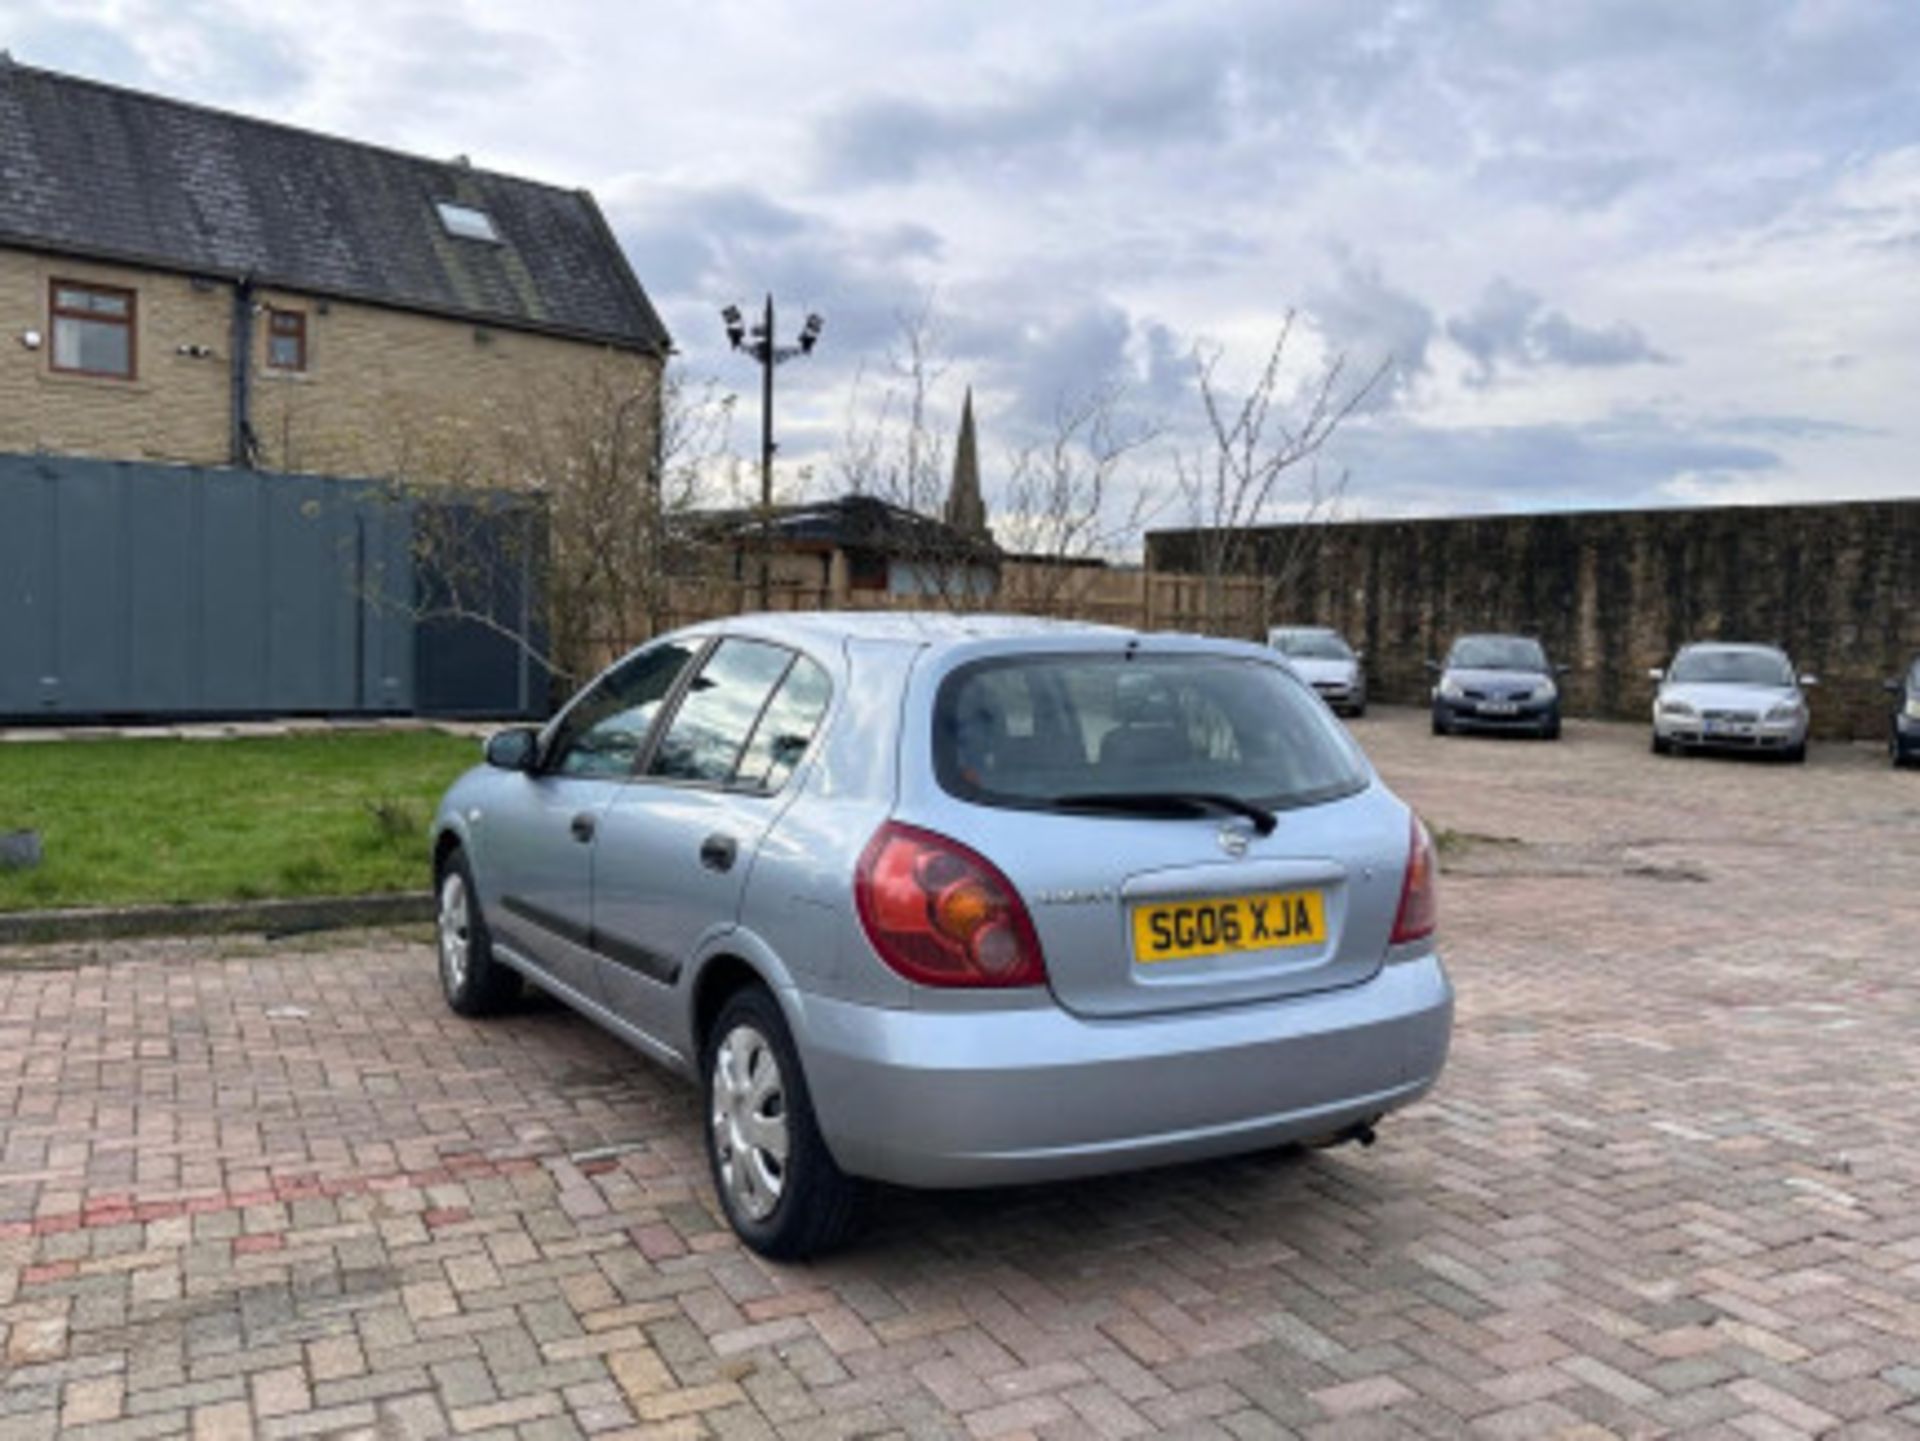 2006 NISSAN ALMERA - PERFECT CAR FOR BEGINNERS AND YOUNG LEARNERS >>--NO VAT ON HAMMER--<< - Image 24 of 60